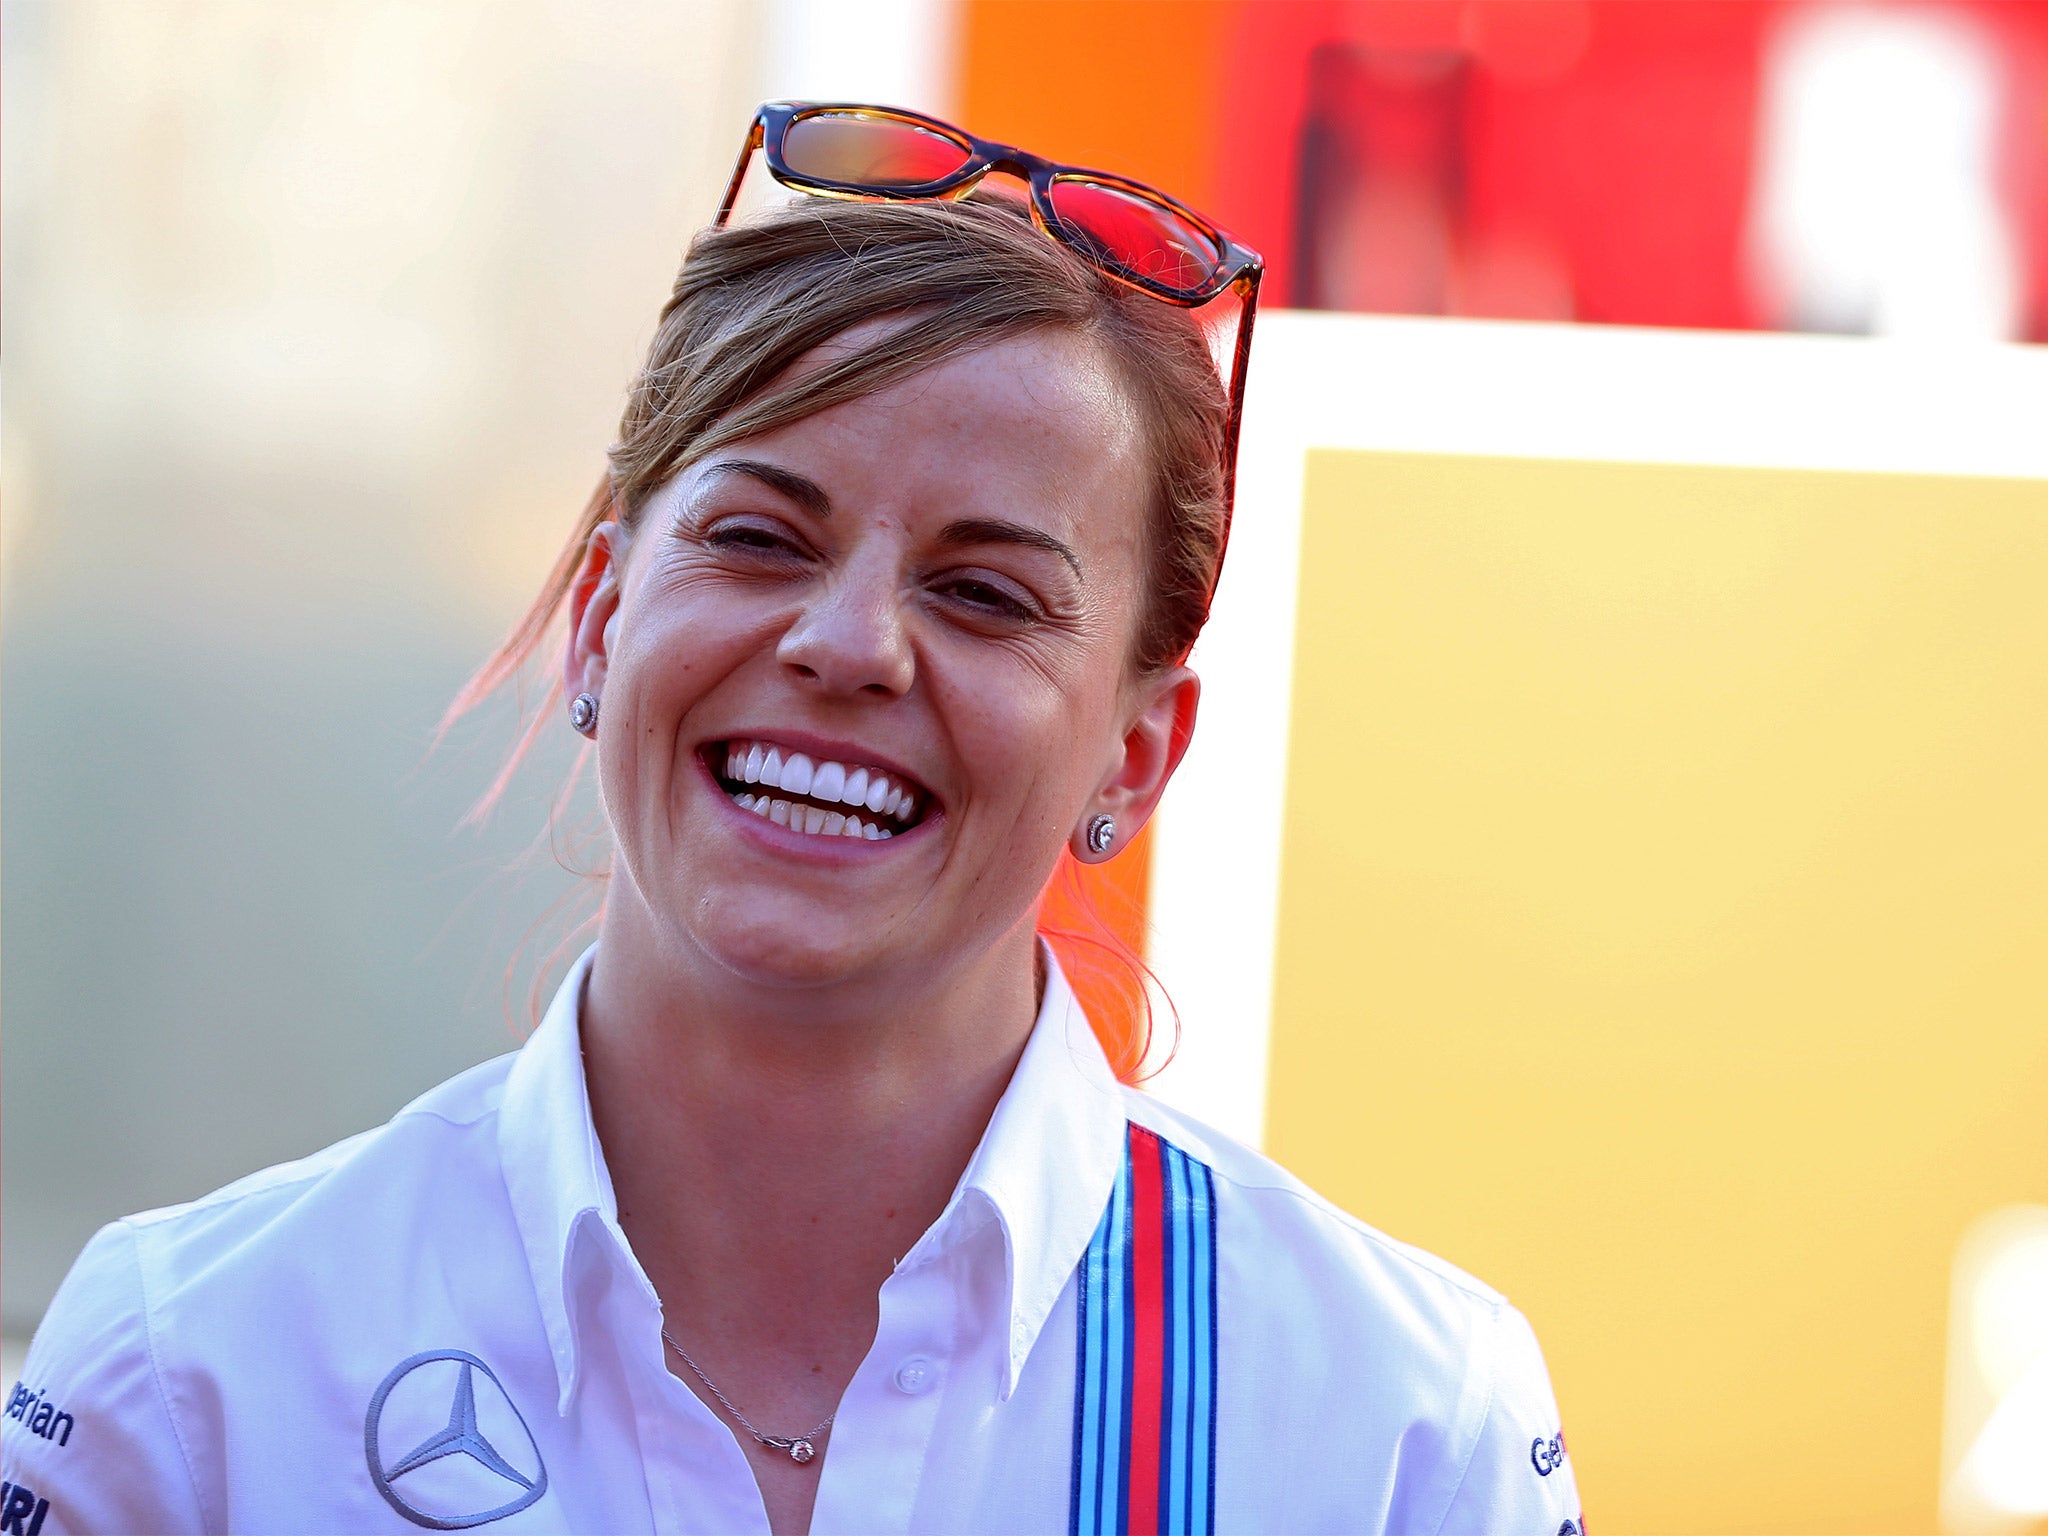 Susie Wolff takes part in a practice session ahead of this year’s German Grand Prix